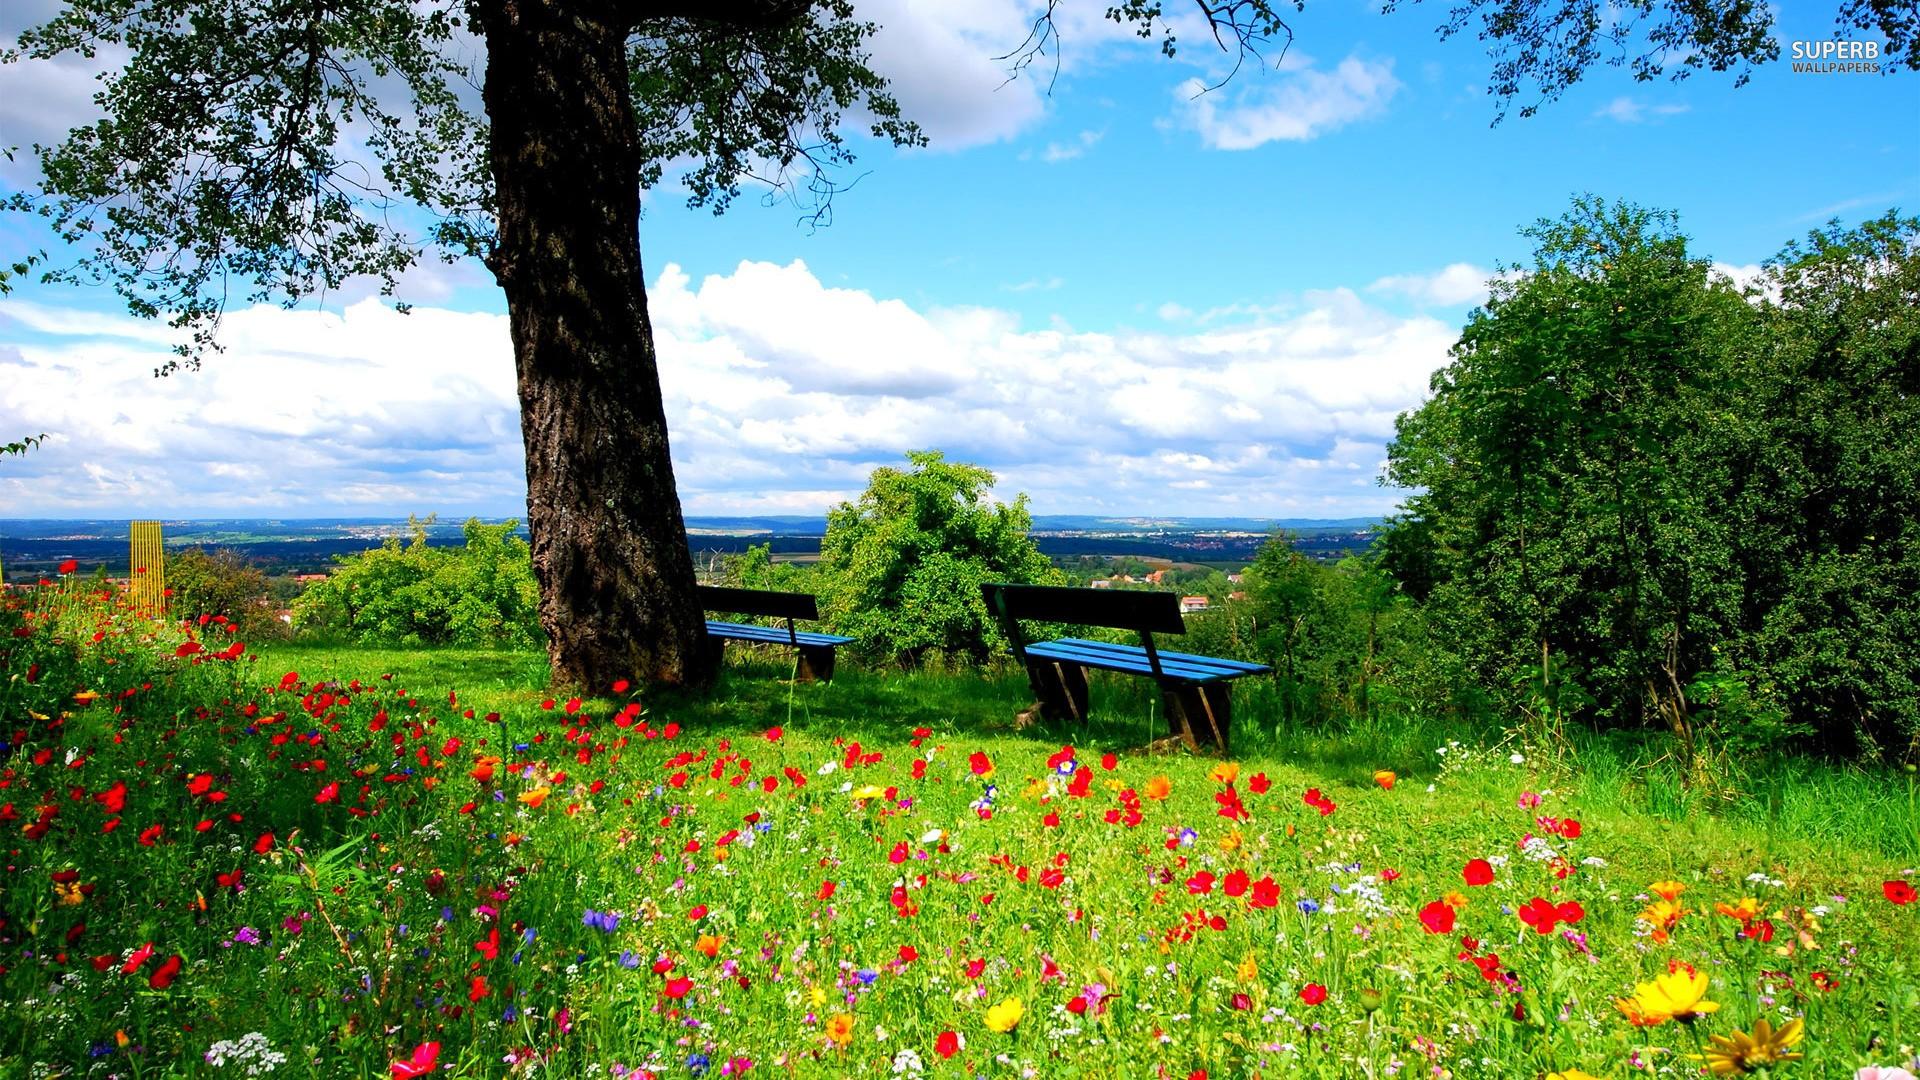 Flower: Wonderful Overlook Surrounded Tree Benches Ovelook